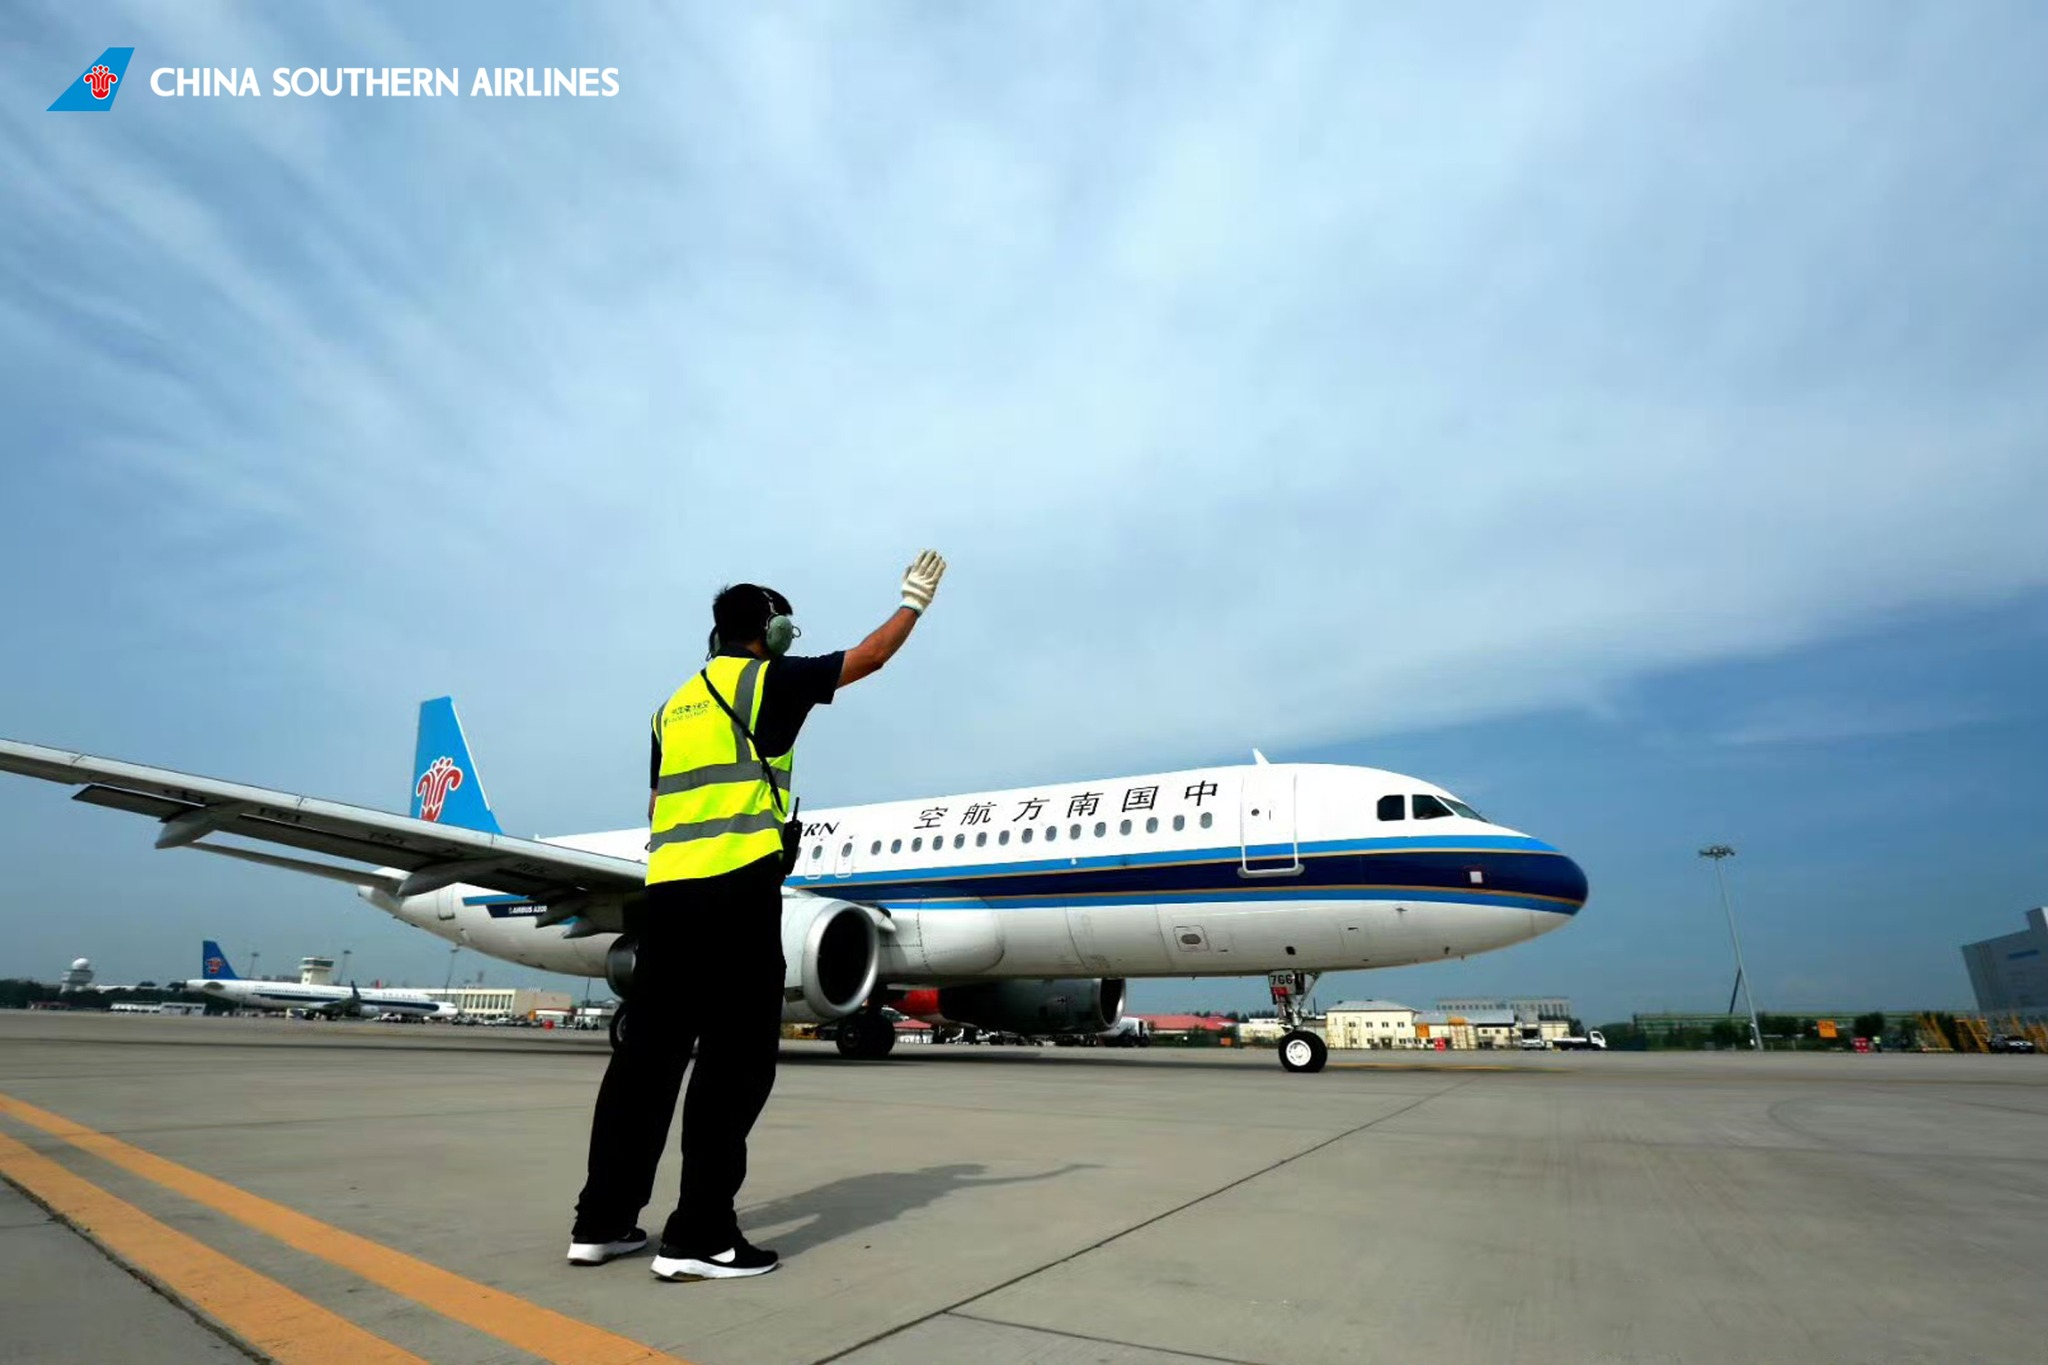 China southern airlines staff guiding plane